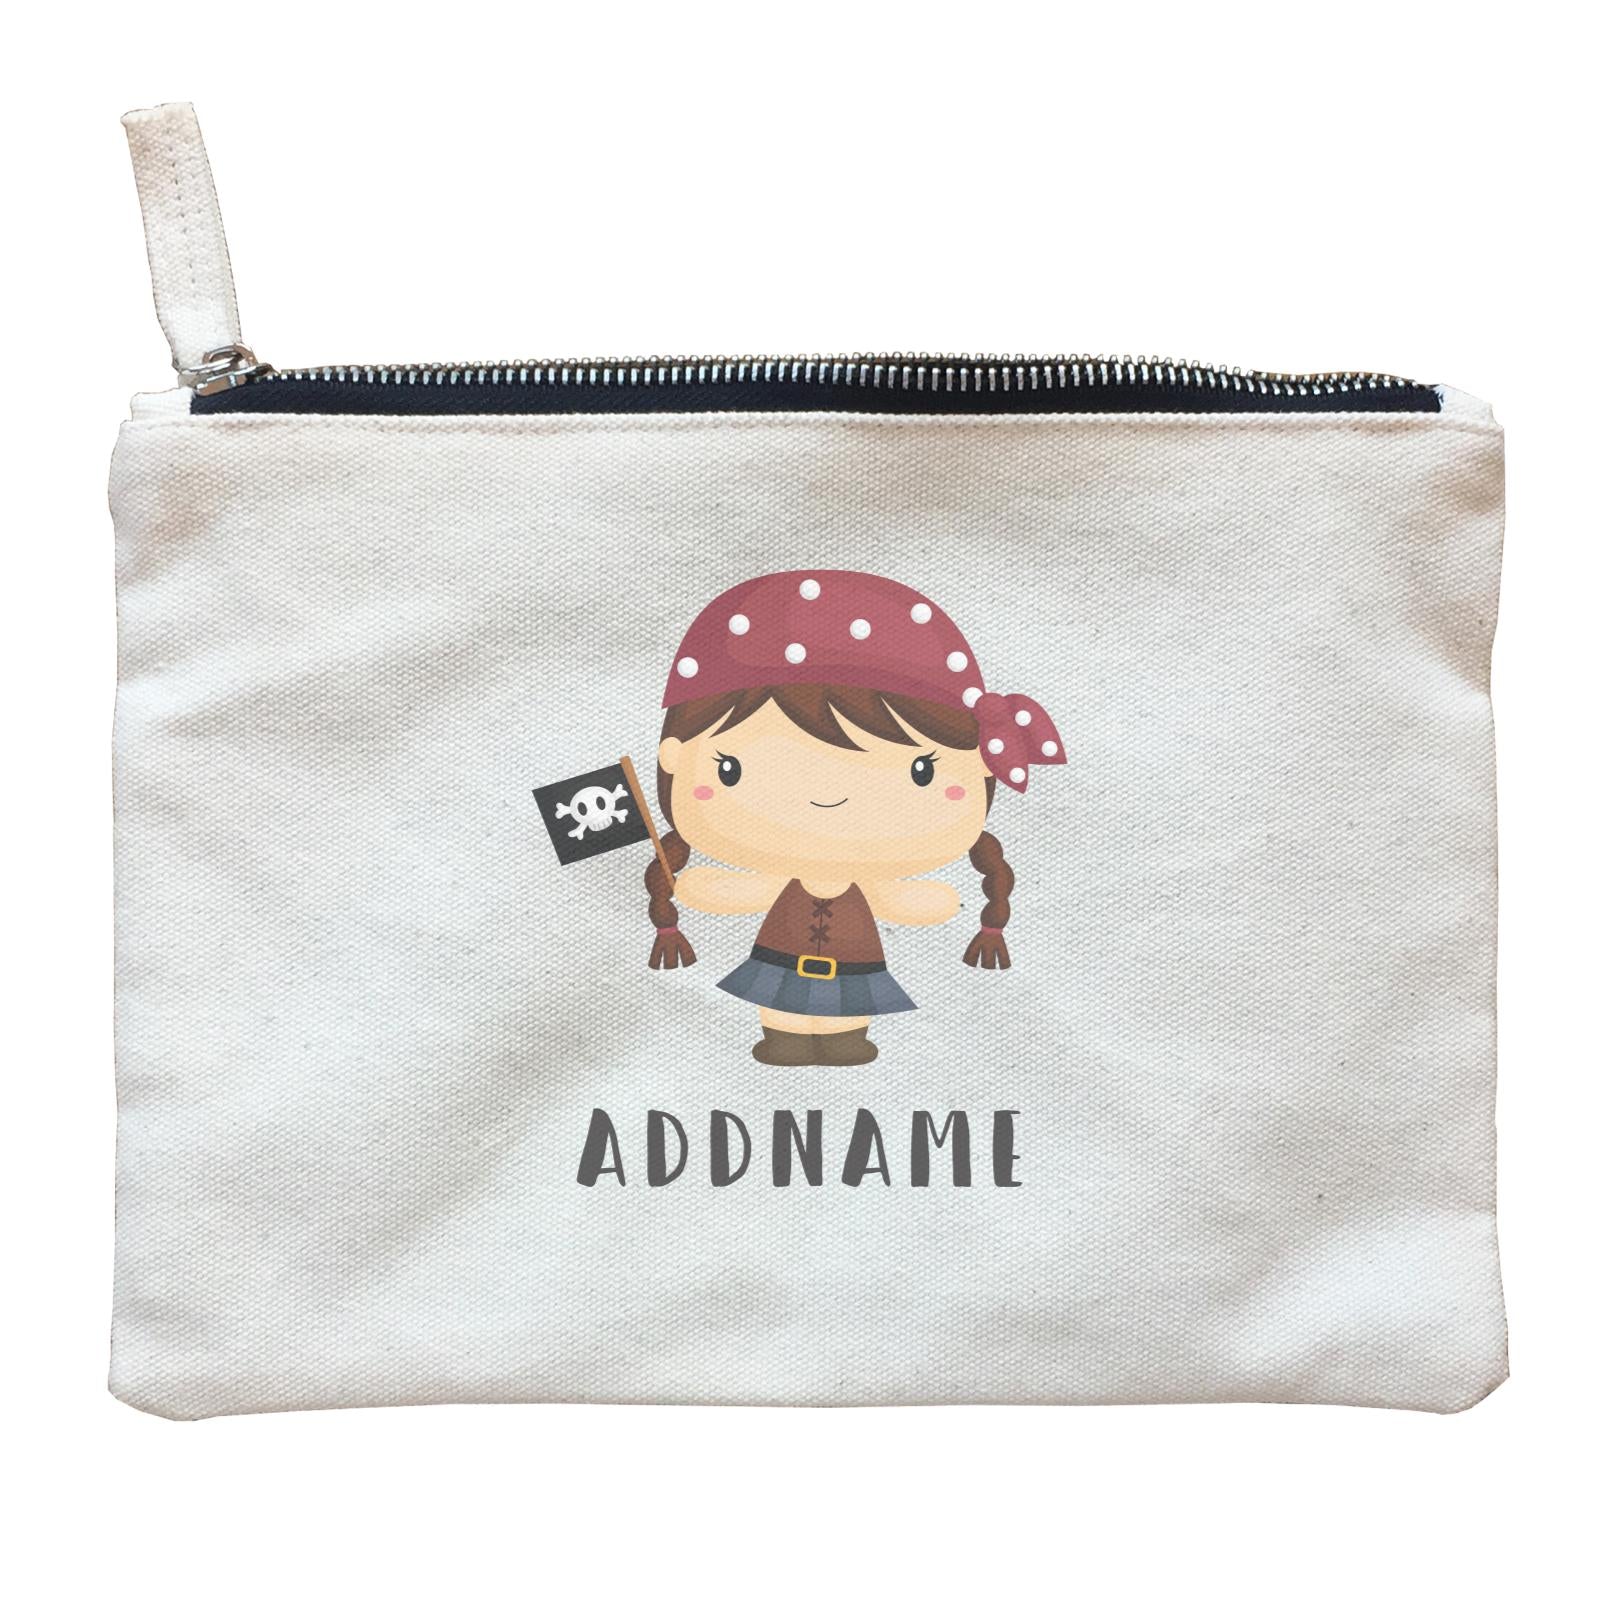 Birthday Pirate Girl Crew Holding Pirate Flag Addname Zipper Pouch